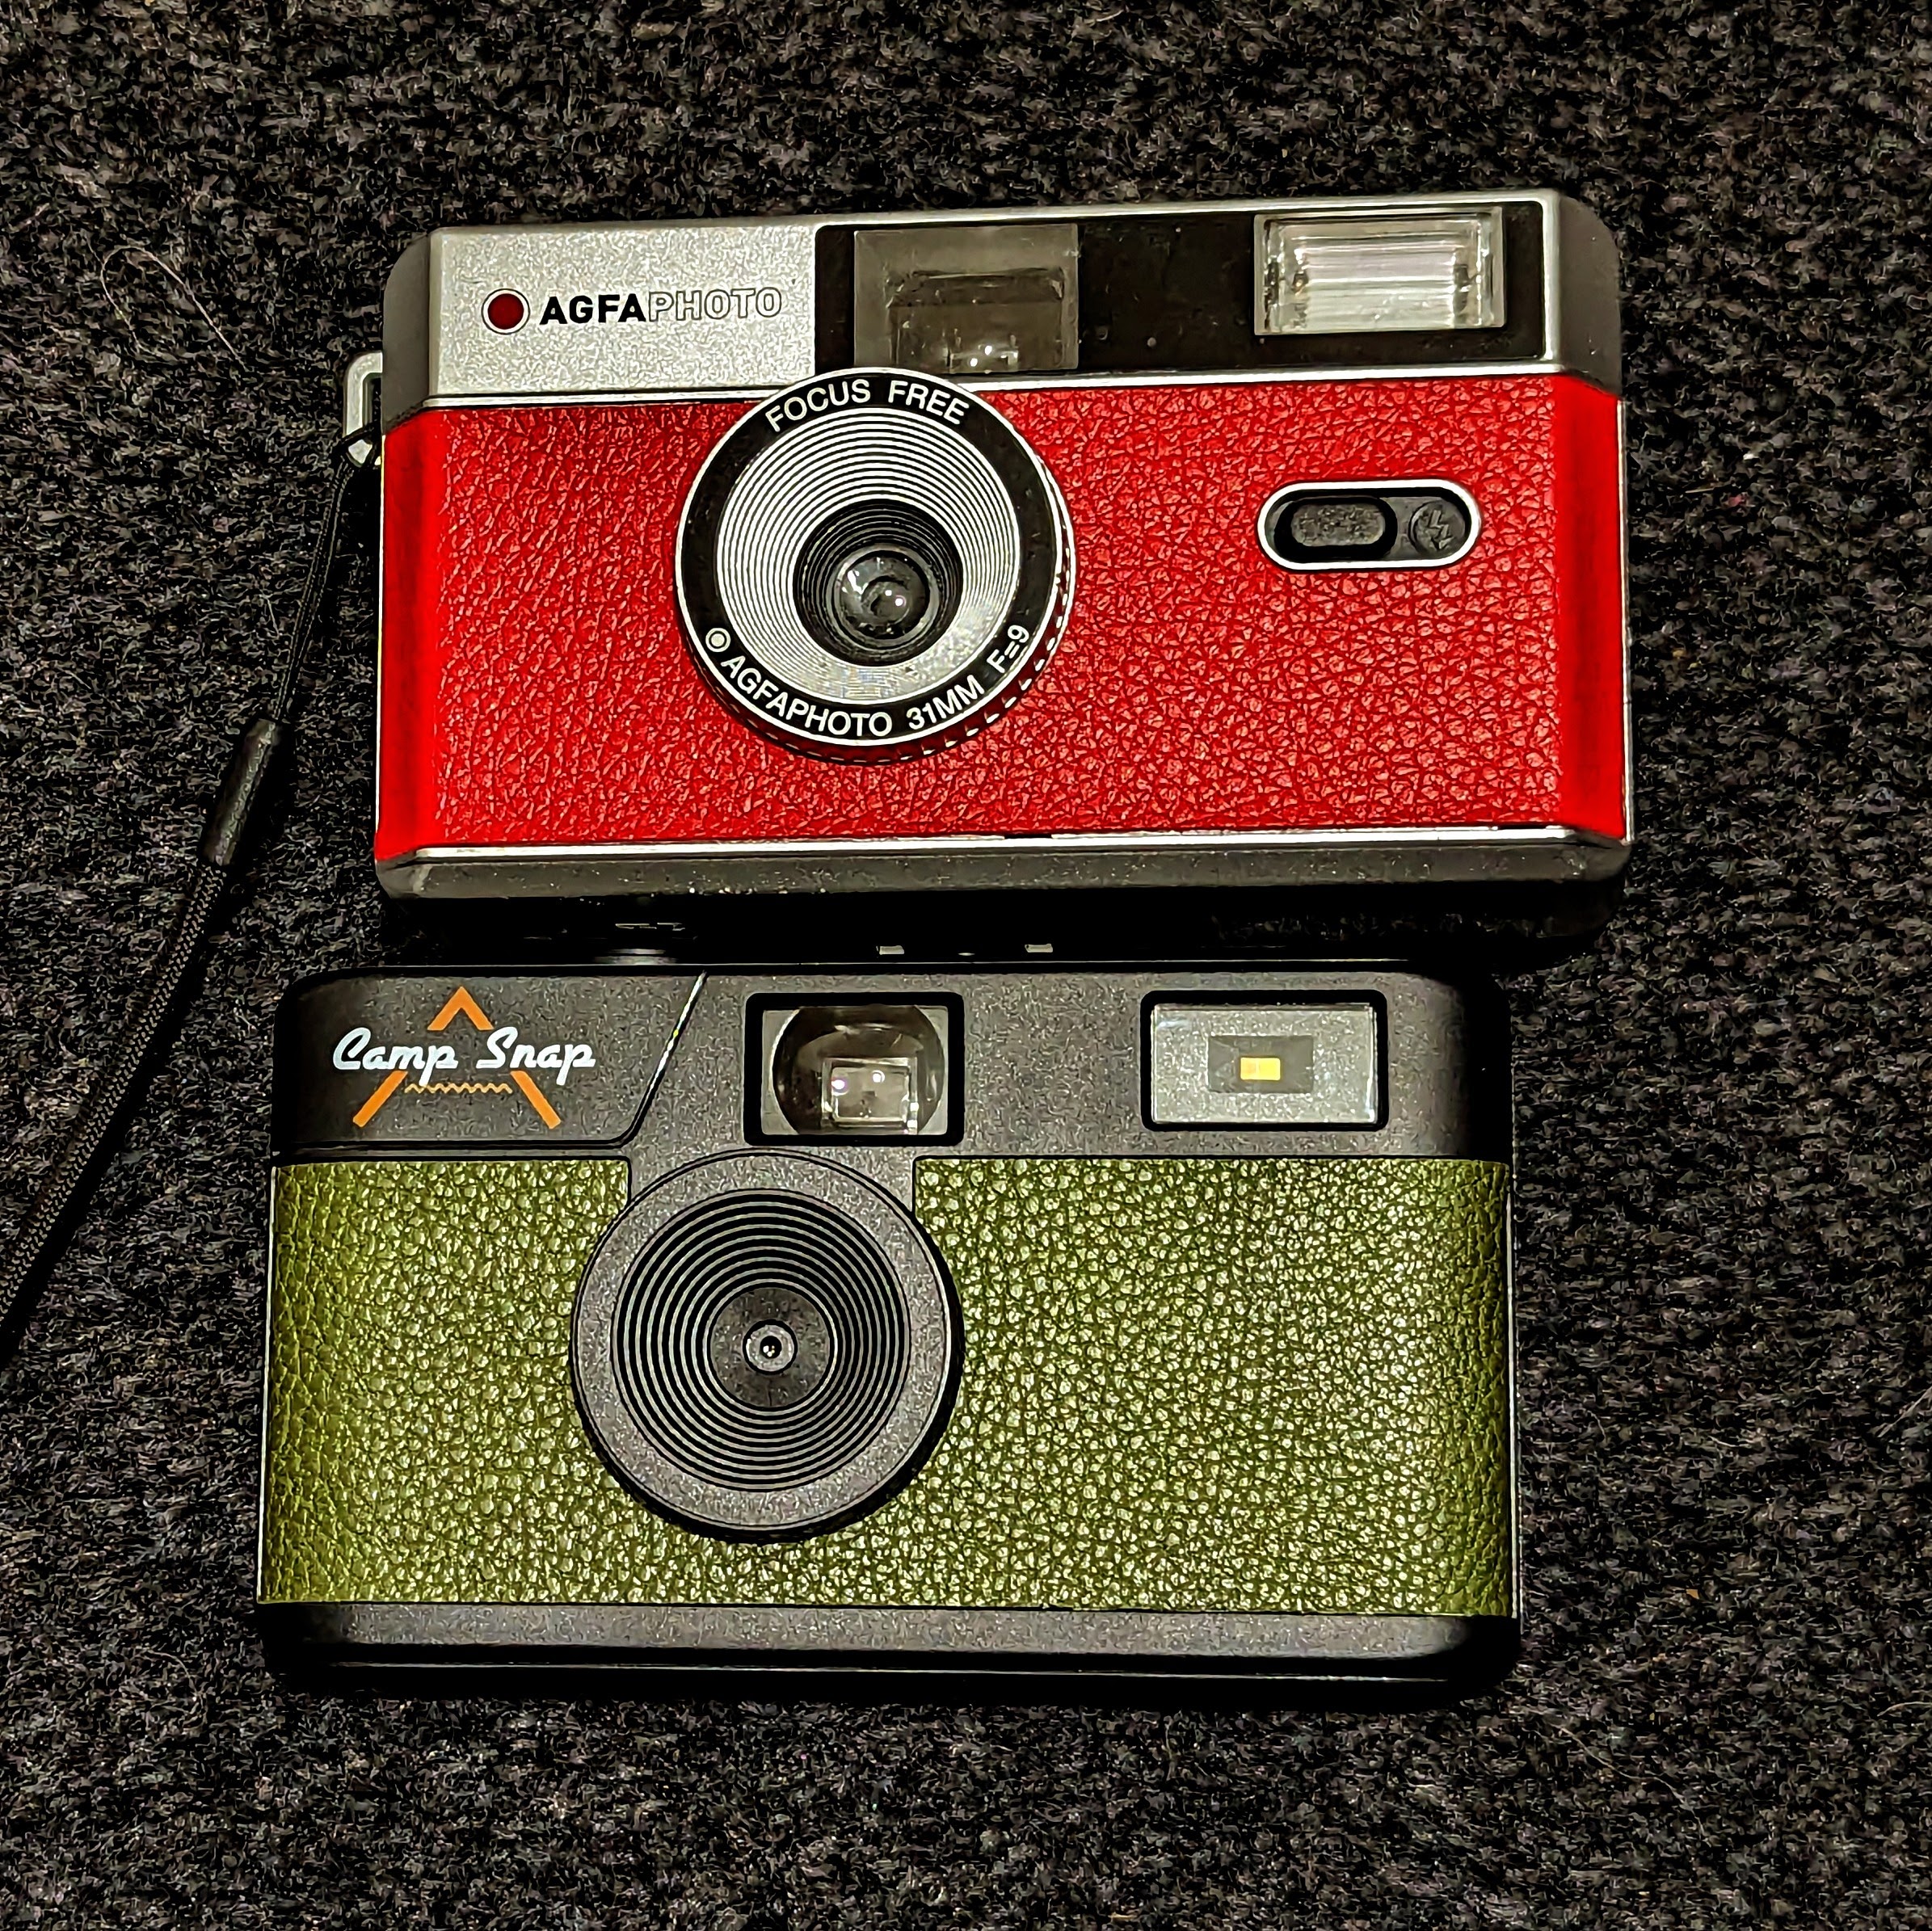 Agafphoto Analogue and Camp Snap cameras